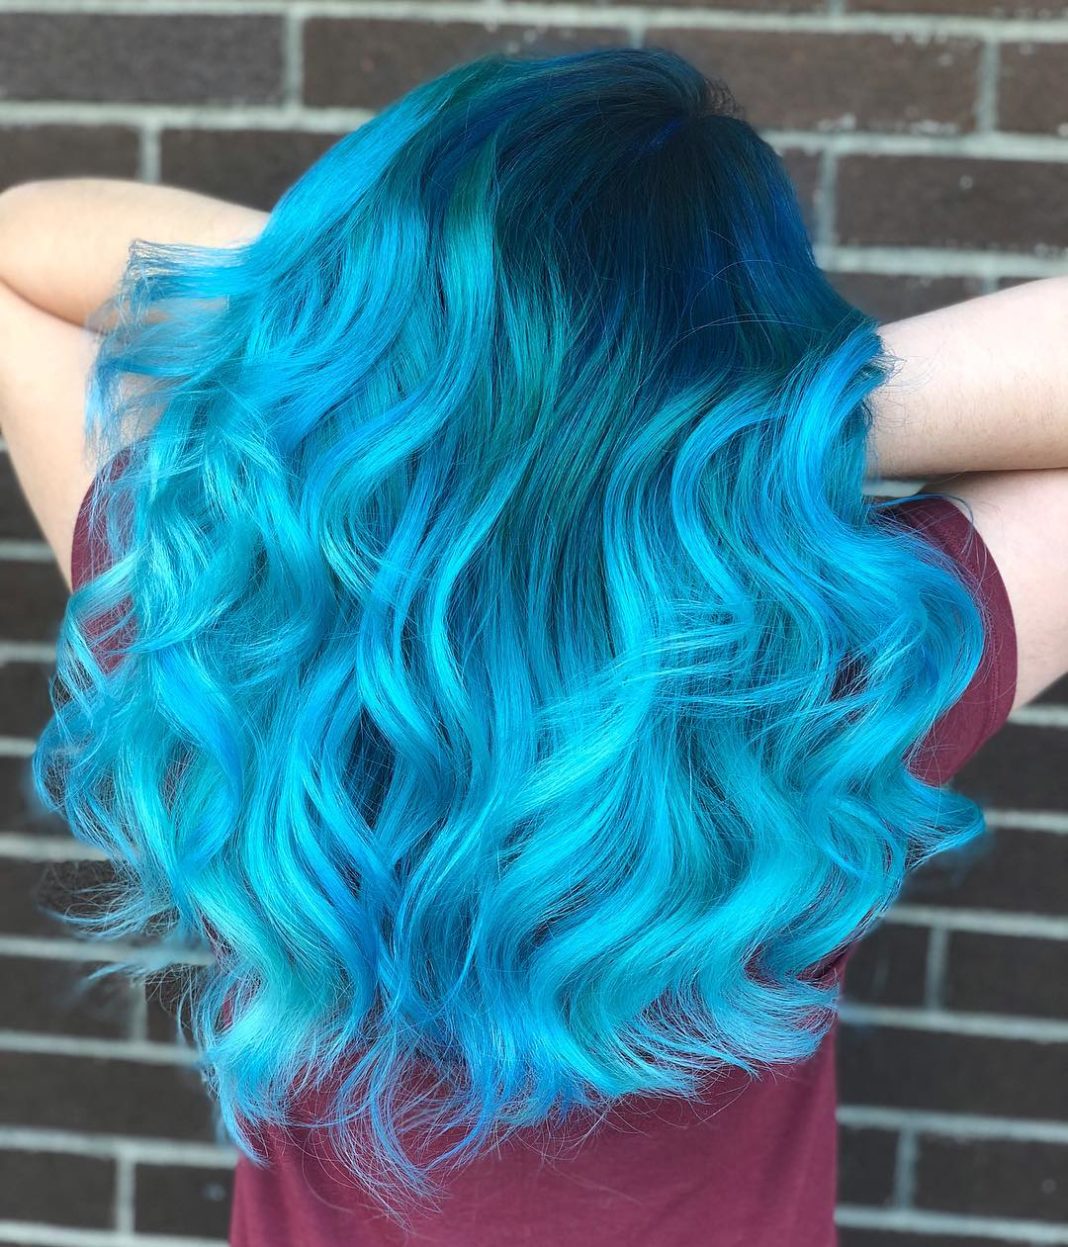 Ocean Blue Hair Will Cool You this Summer - My Daily Magazine - Art ...